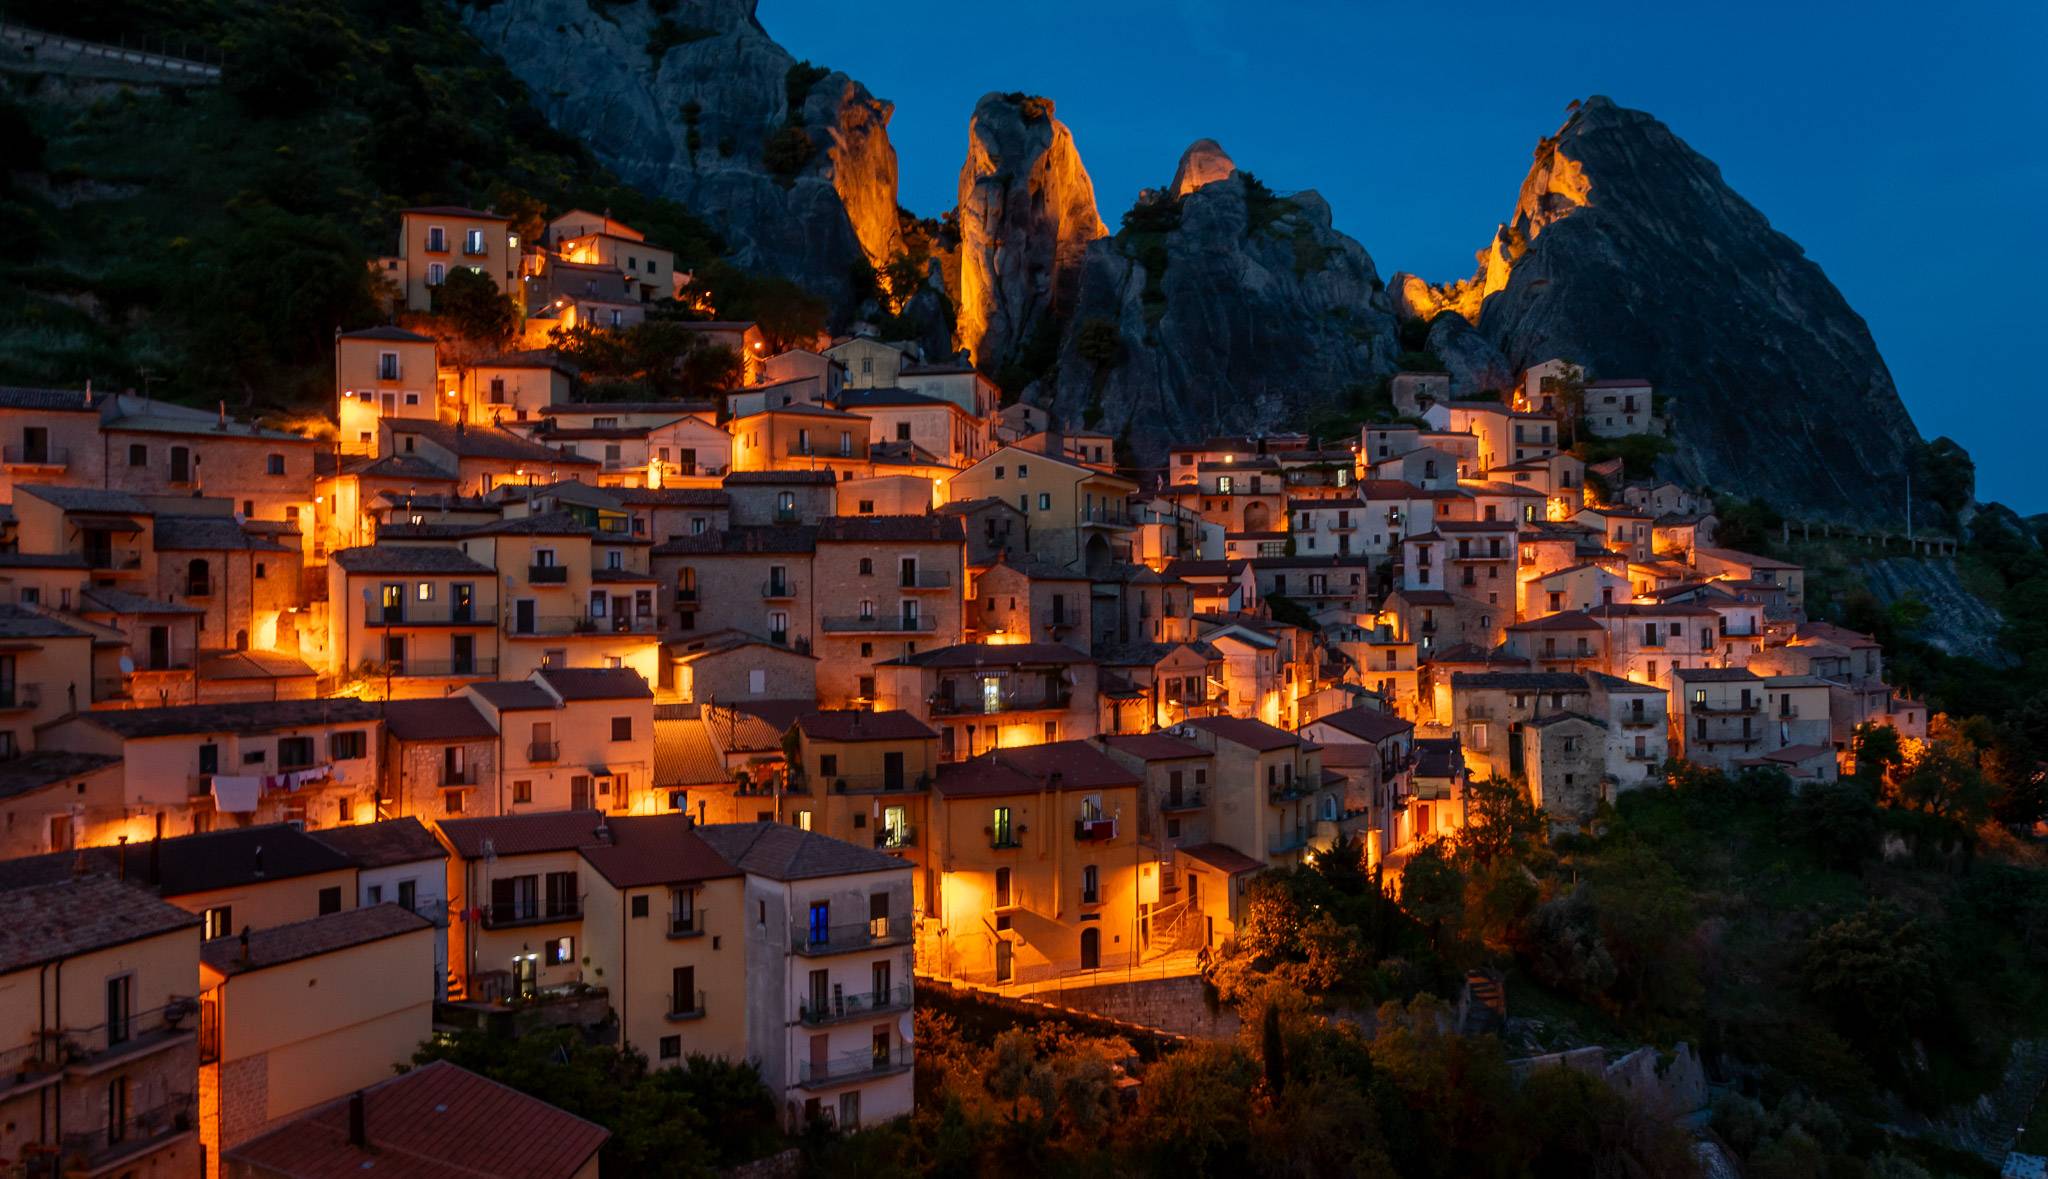 Castelmezzano view from our apartment. It’s one of the most beautiful towns I’ve ever been to!